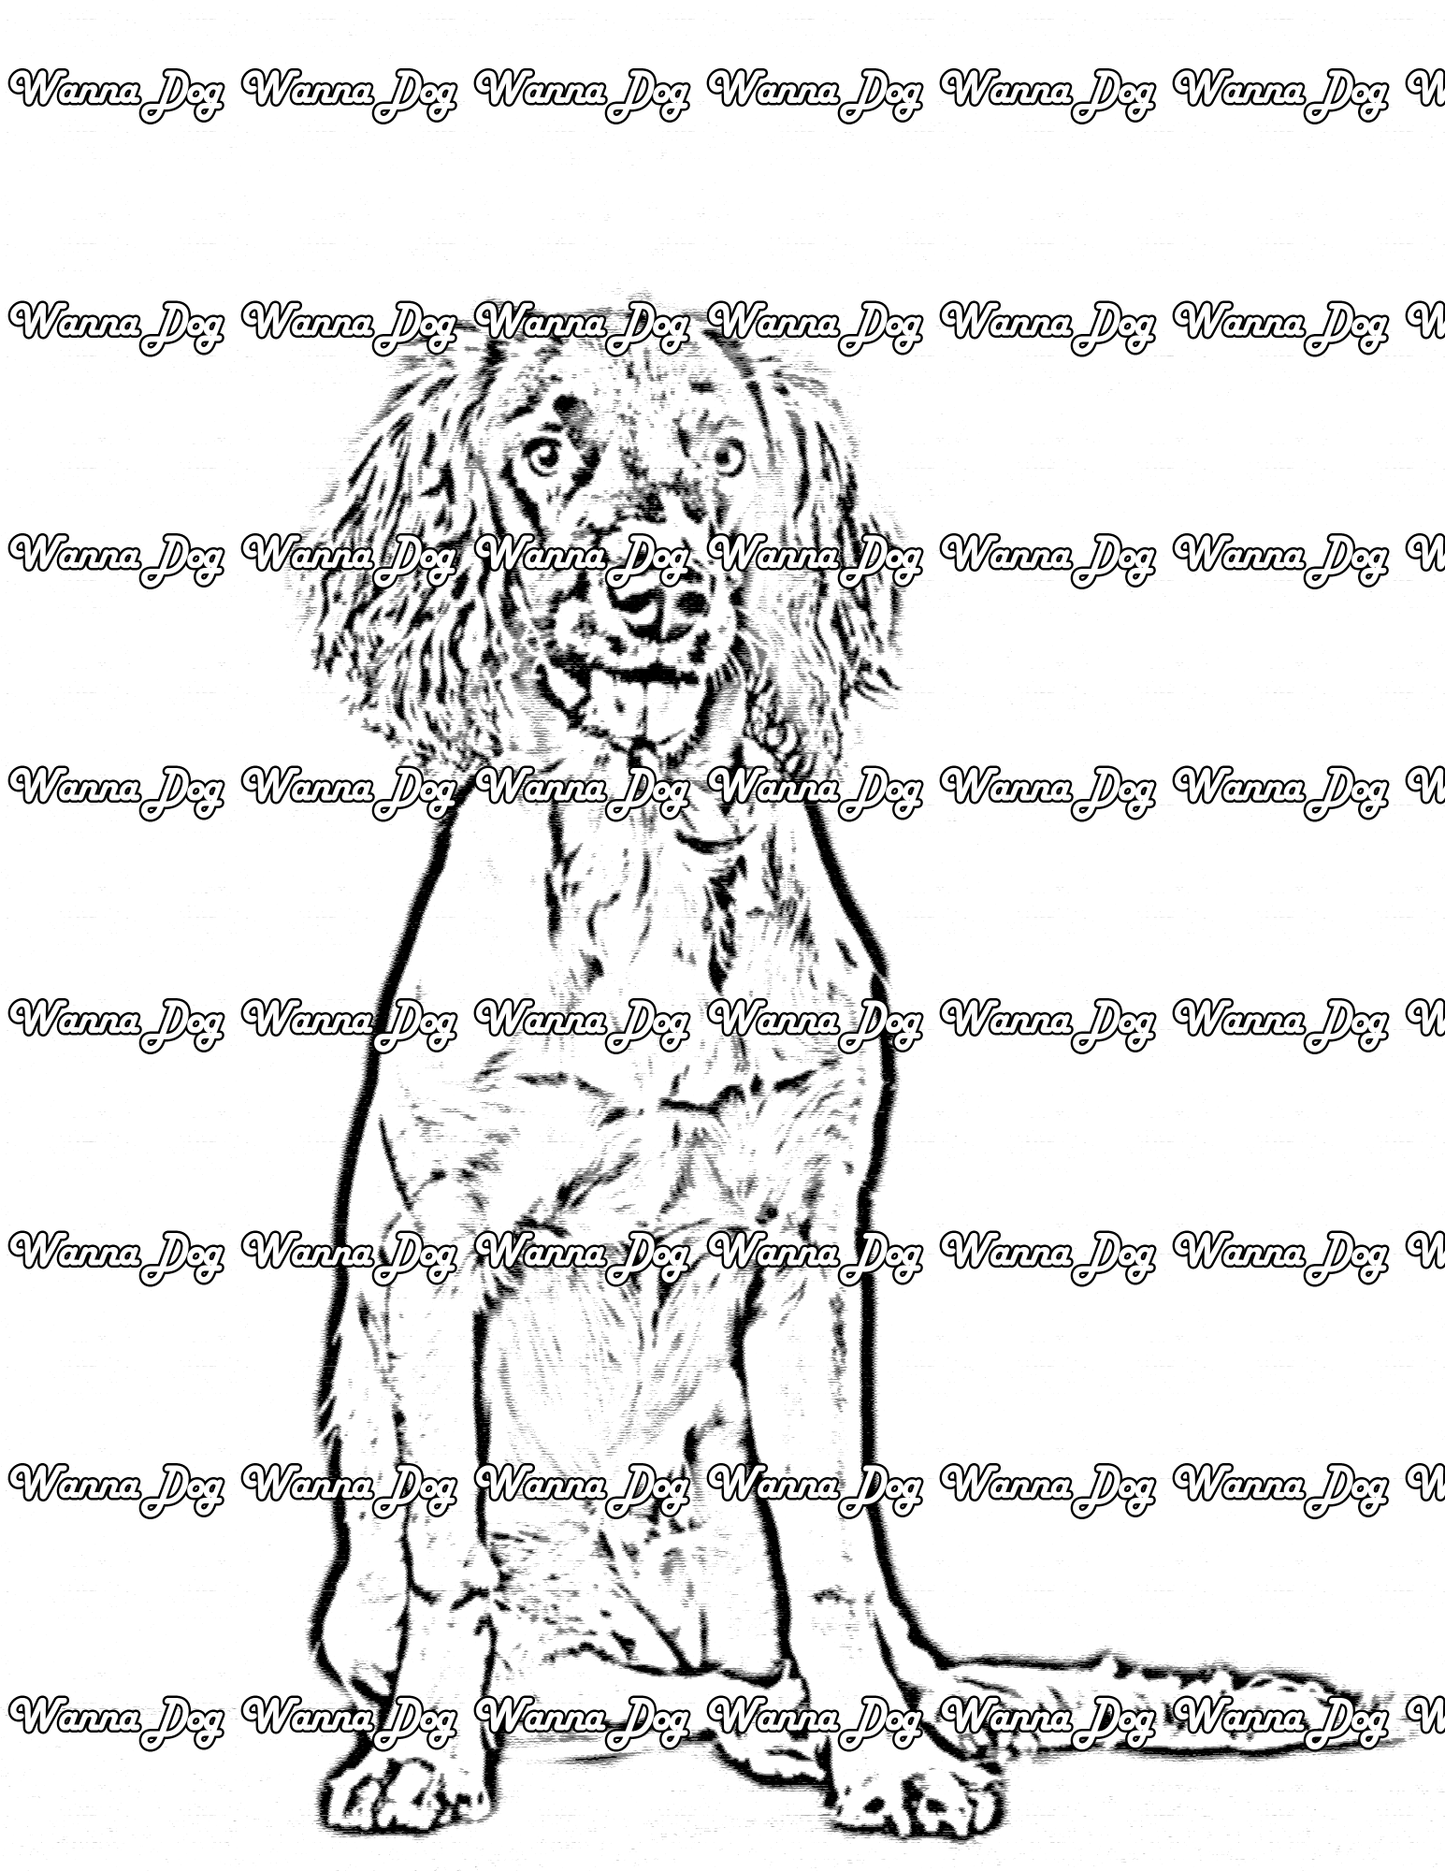 English Springer Spaniel Coloring Page of a English Springer Spaniel sitting, posing, with their tongue out